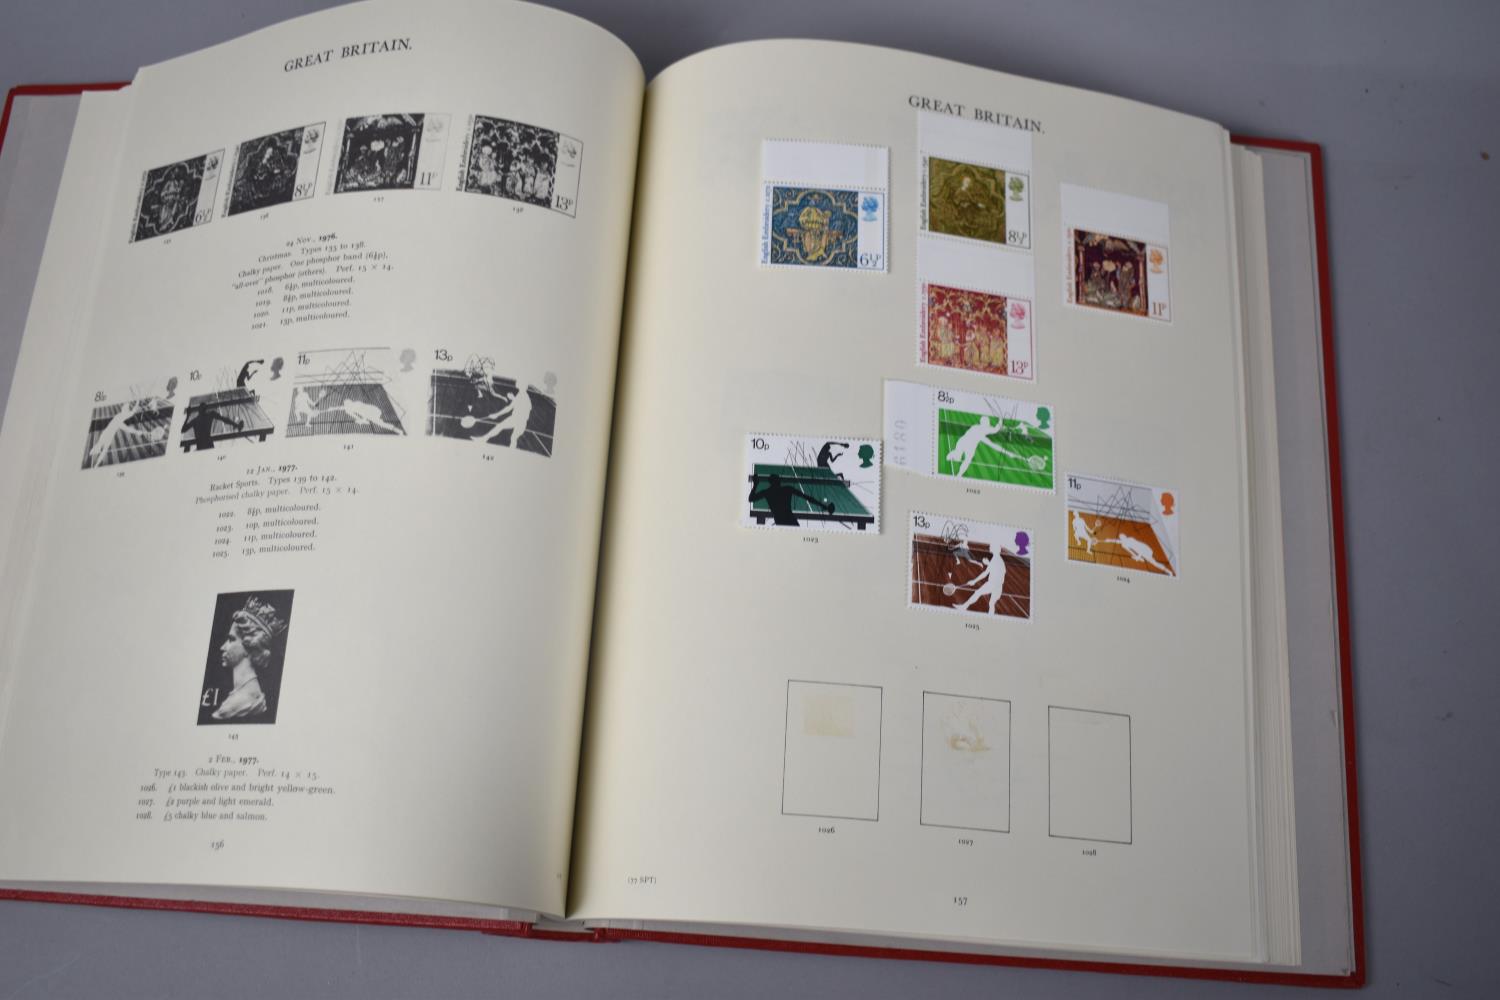 A Stanley Gibbons Windsor Stamp Album Containing an Almost Complete Run of QEII Commemorative Stamps - Image 3 of 5